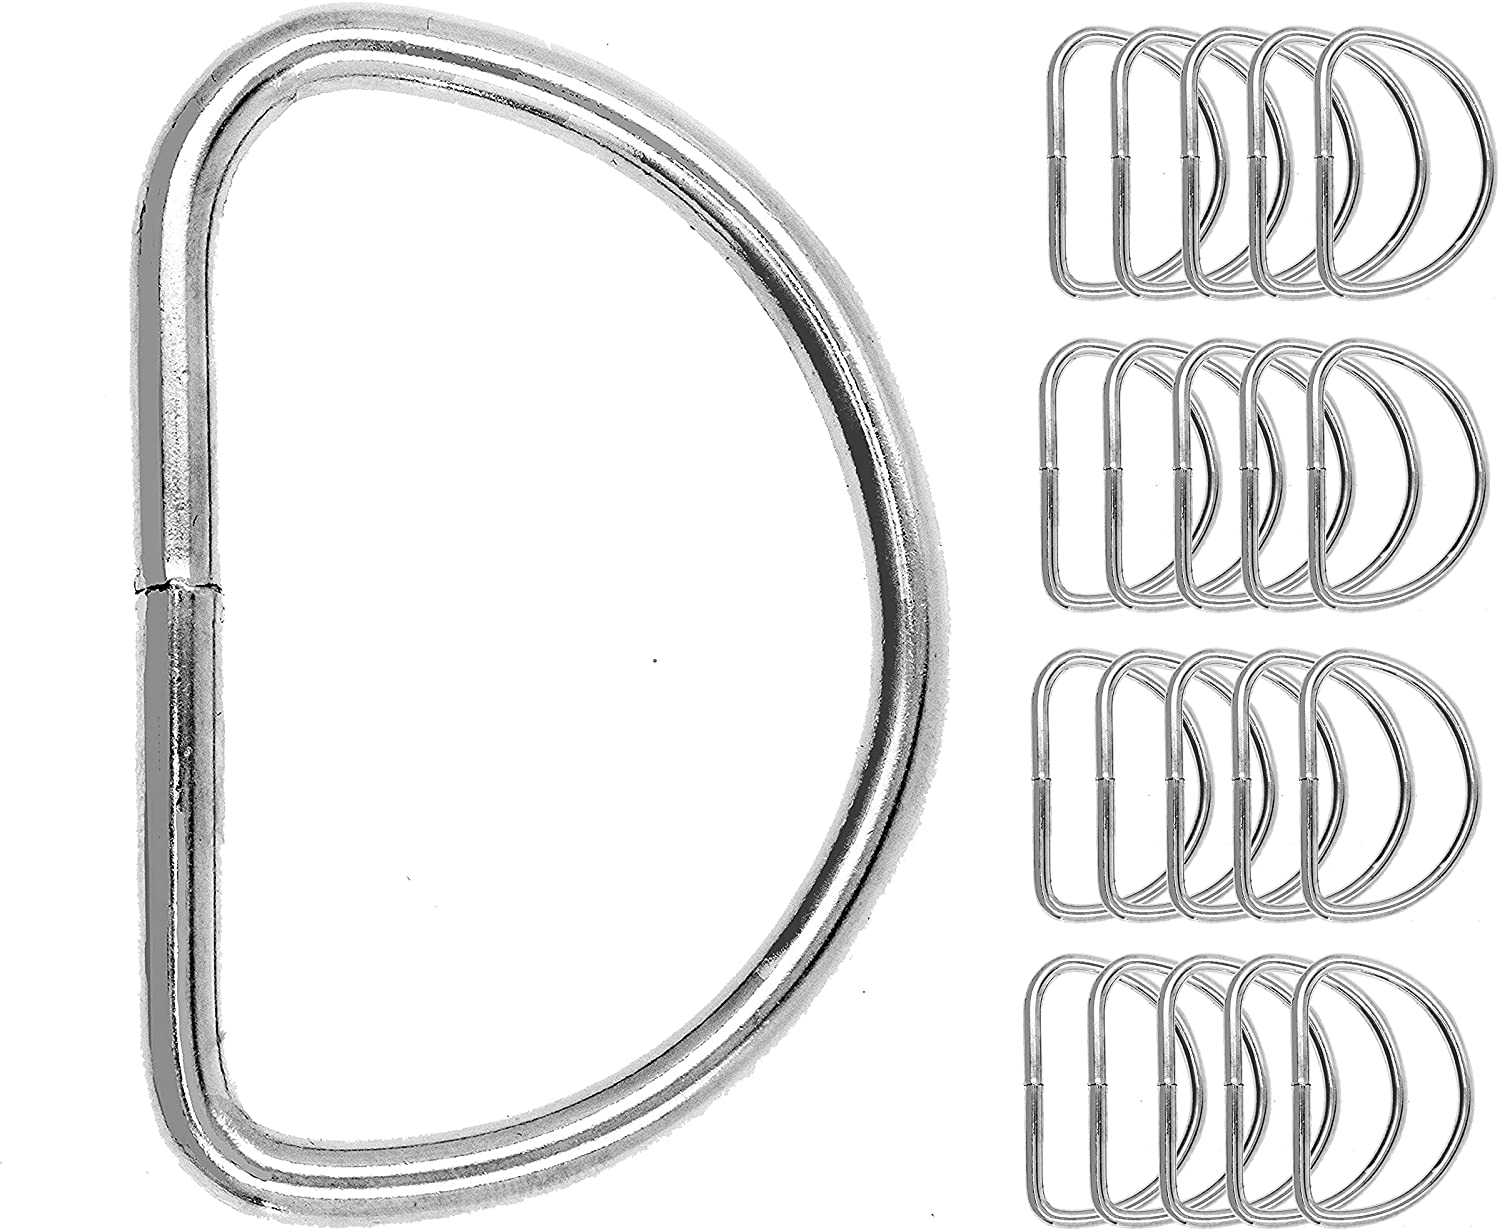 Honkenda Heavy Duty Metal D Rings Buckle, 50 Pack Thicker Silver 1 Inch D  Shape Rings for DIY Sewing, Keychains, Bag Belt, Crafts and Dog Leash